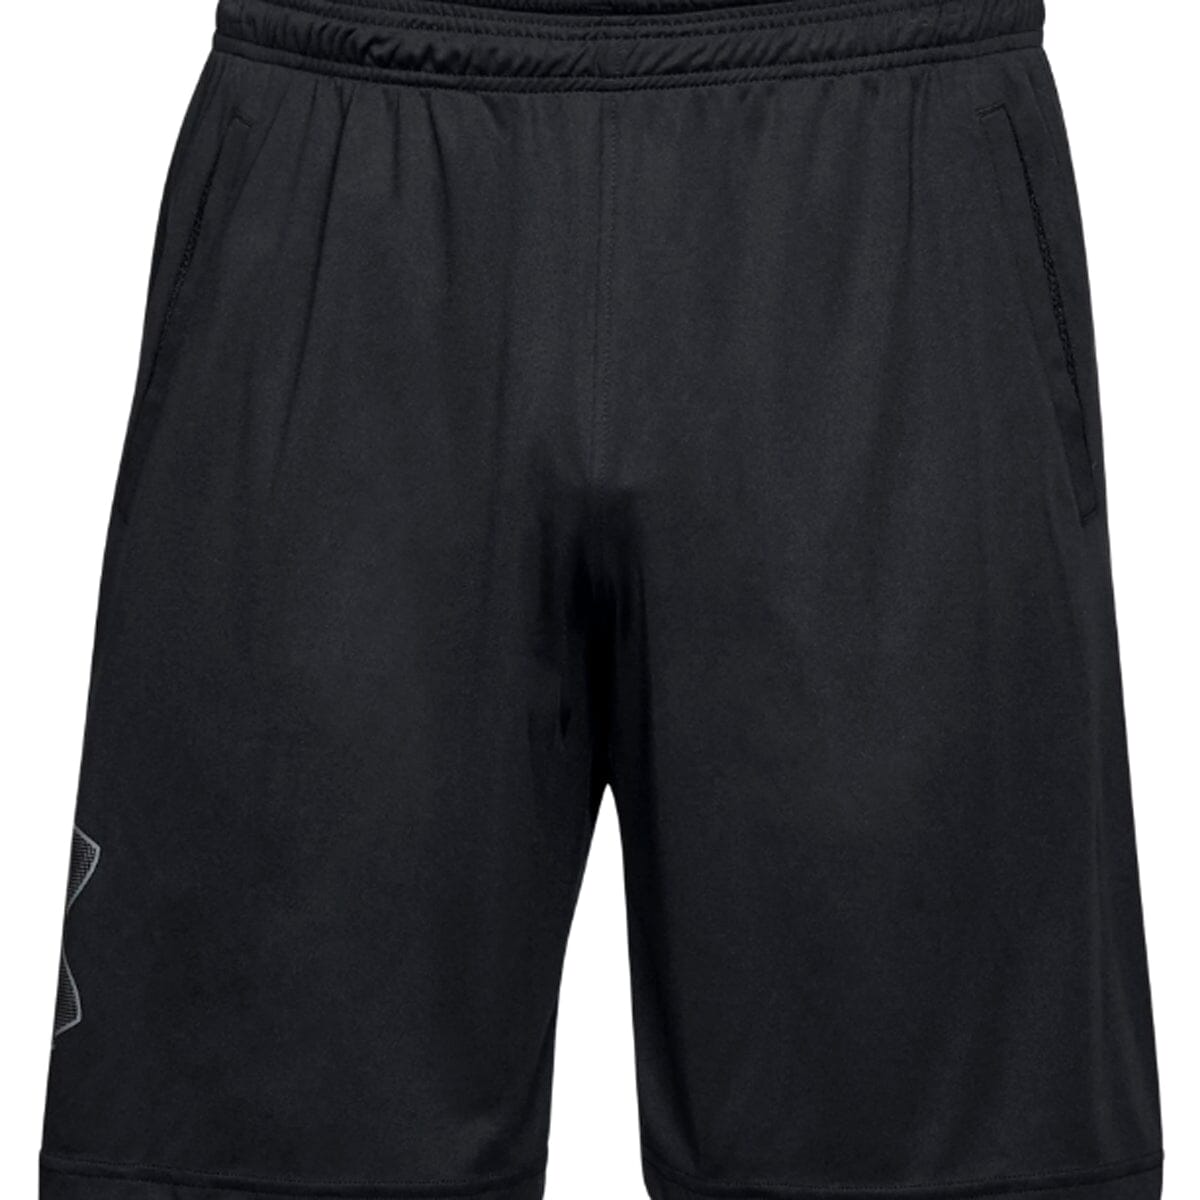 Under Armour Men's Tech™ Graphic Shorts |1306443 Shorts Under Armour Adult Small Black / Graphite 